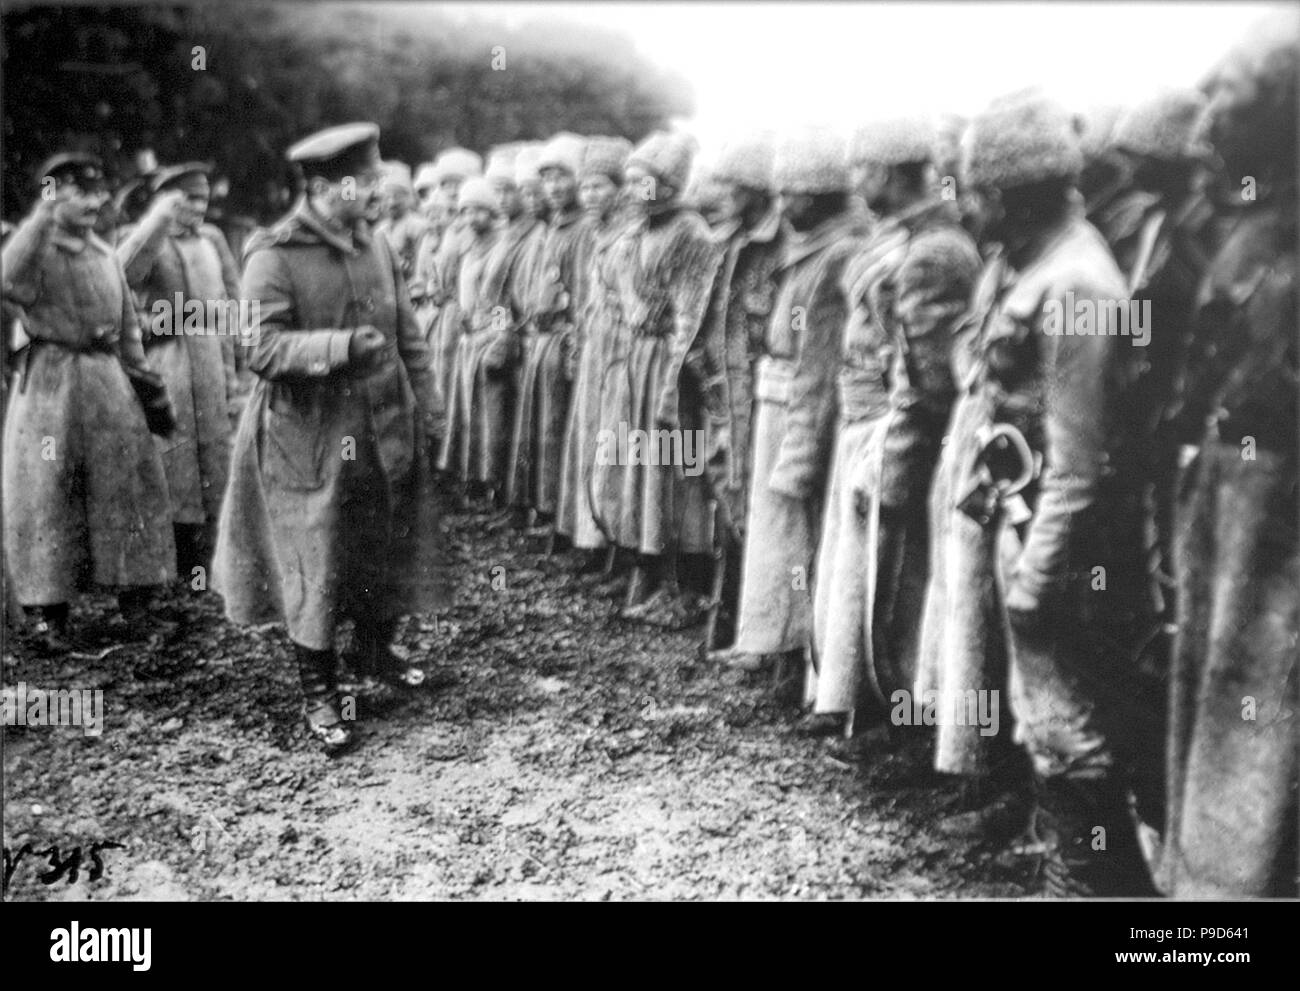 Leon Trotsky at the Red Army troops. Museum: State Museum of the Political History of Russia, St. Petersburg. Stock Photo